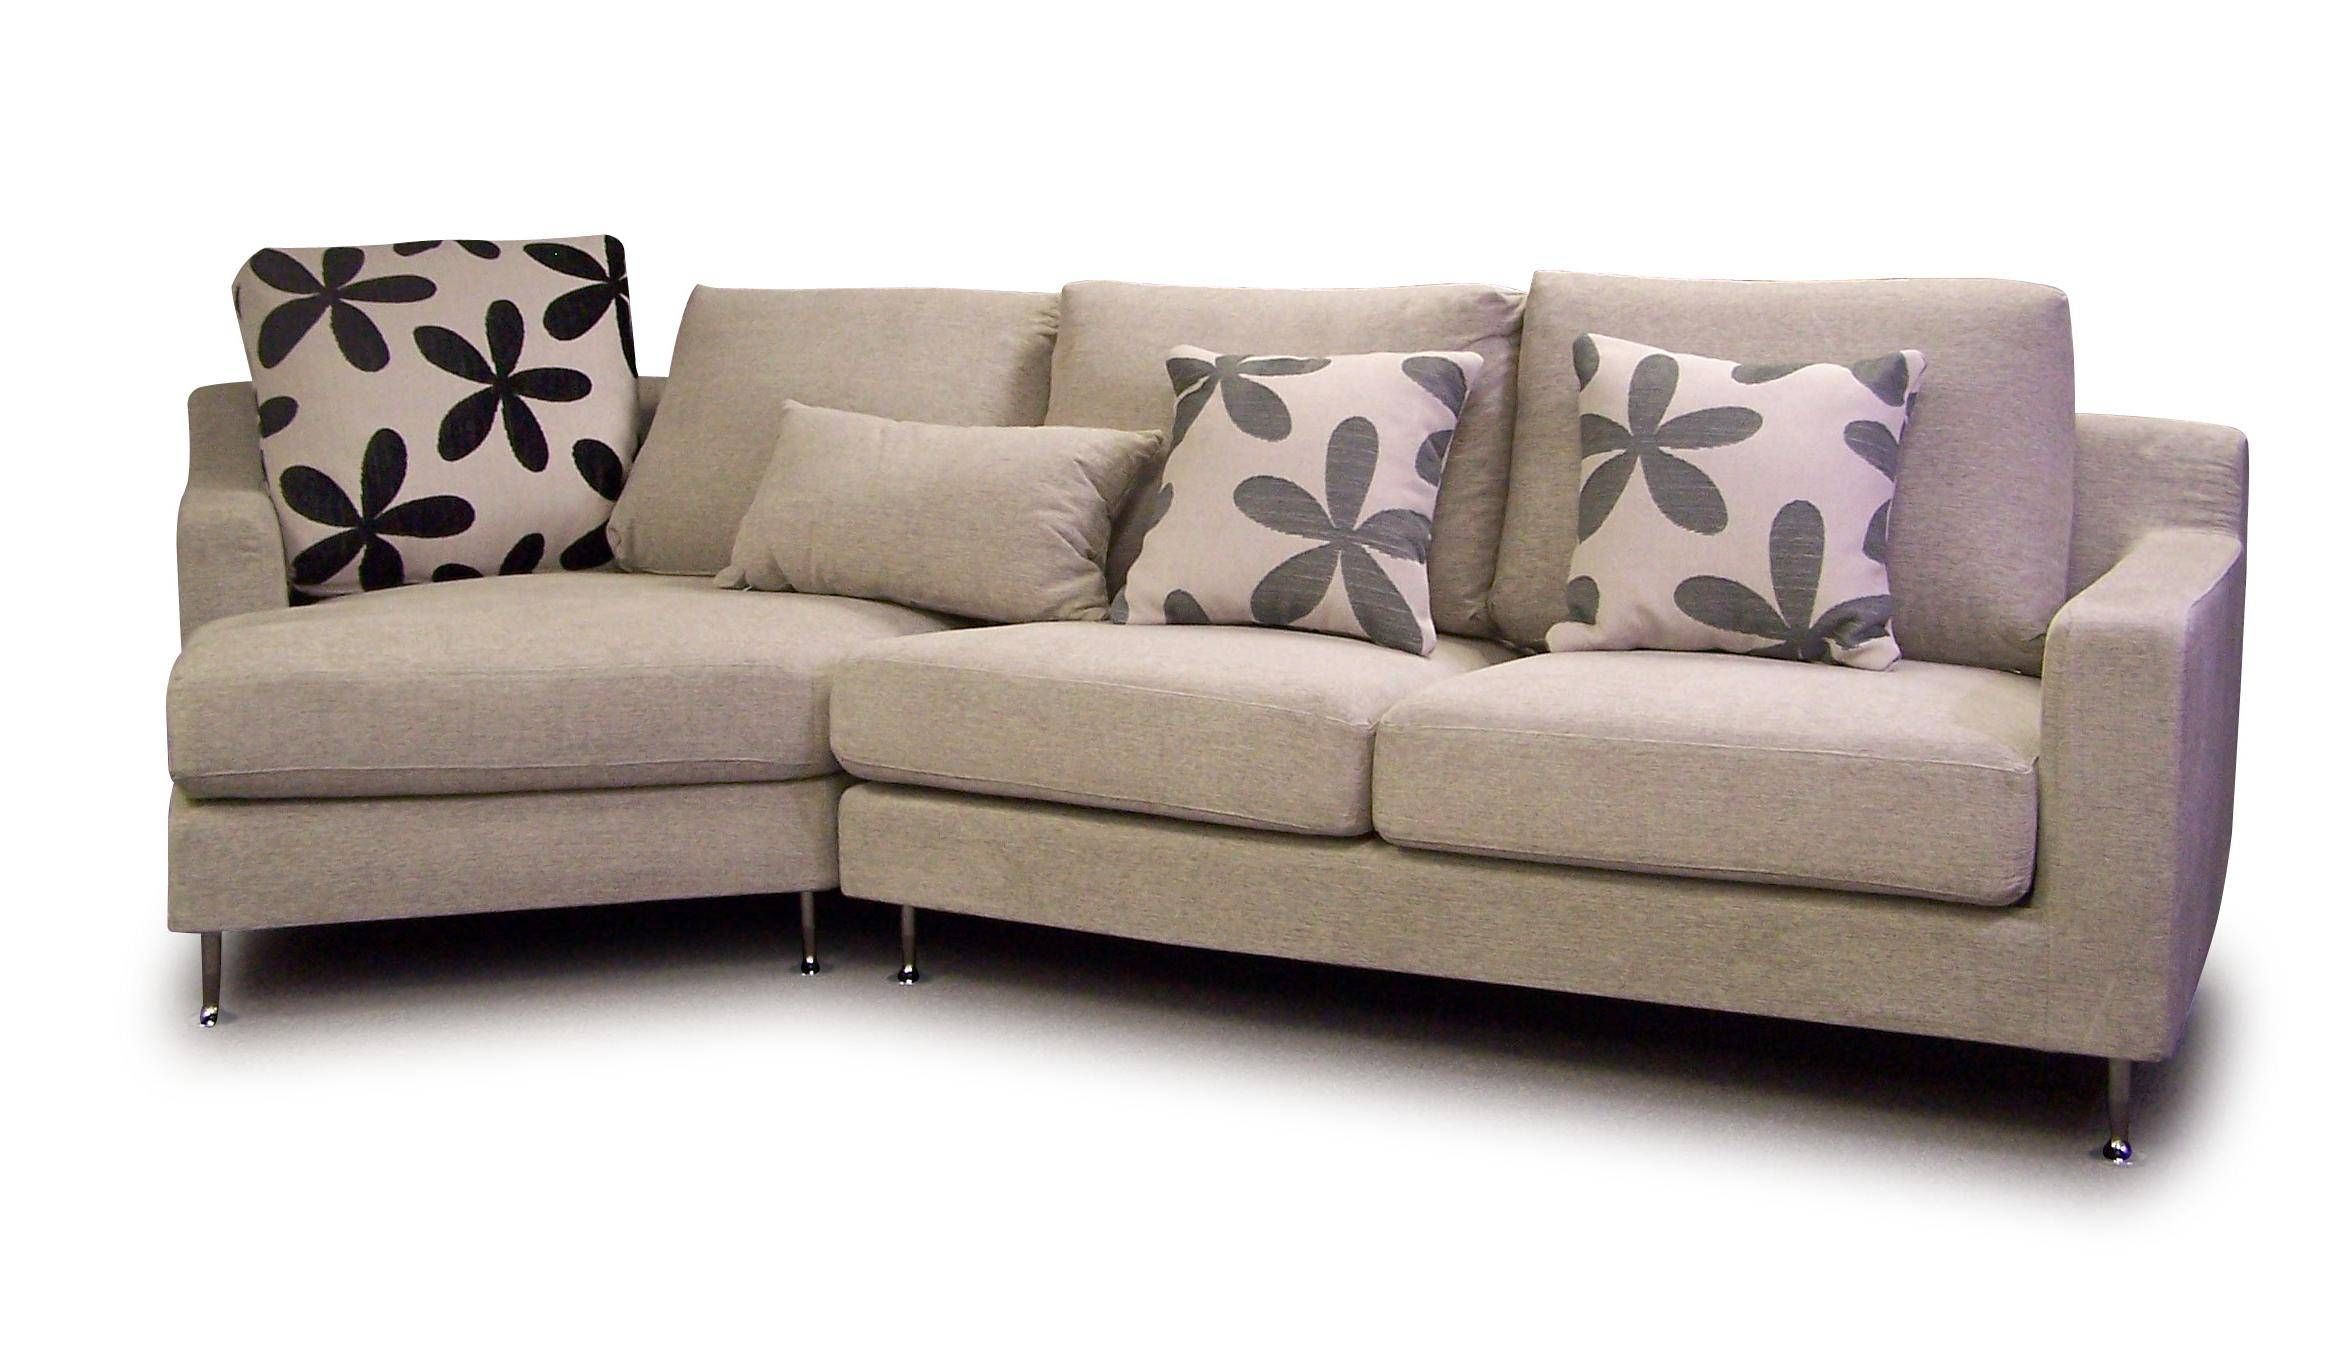 Sofas Center : Sofas For Sale Cheap In Brooklyn Ny Used Leather Regarding Cheap Sofas Houston (View 24 of 30)